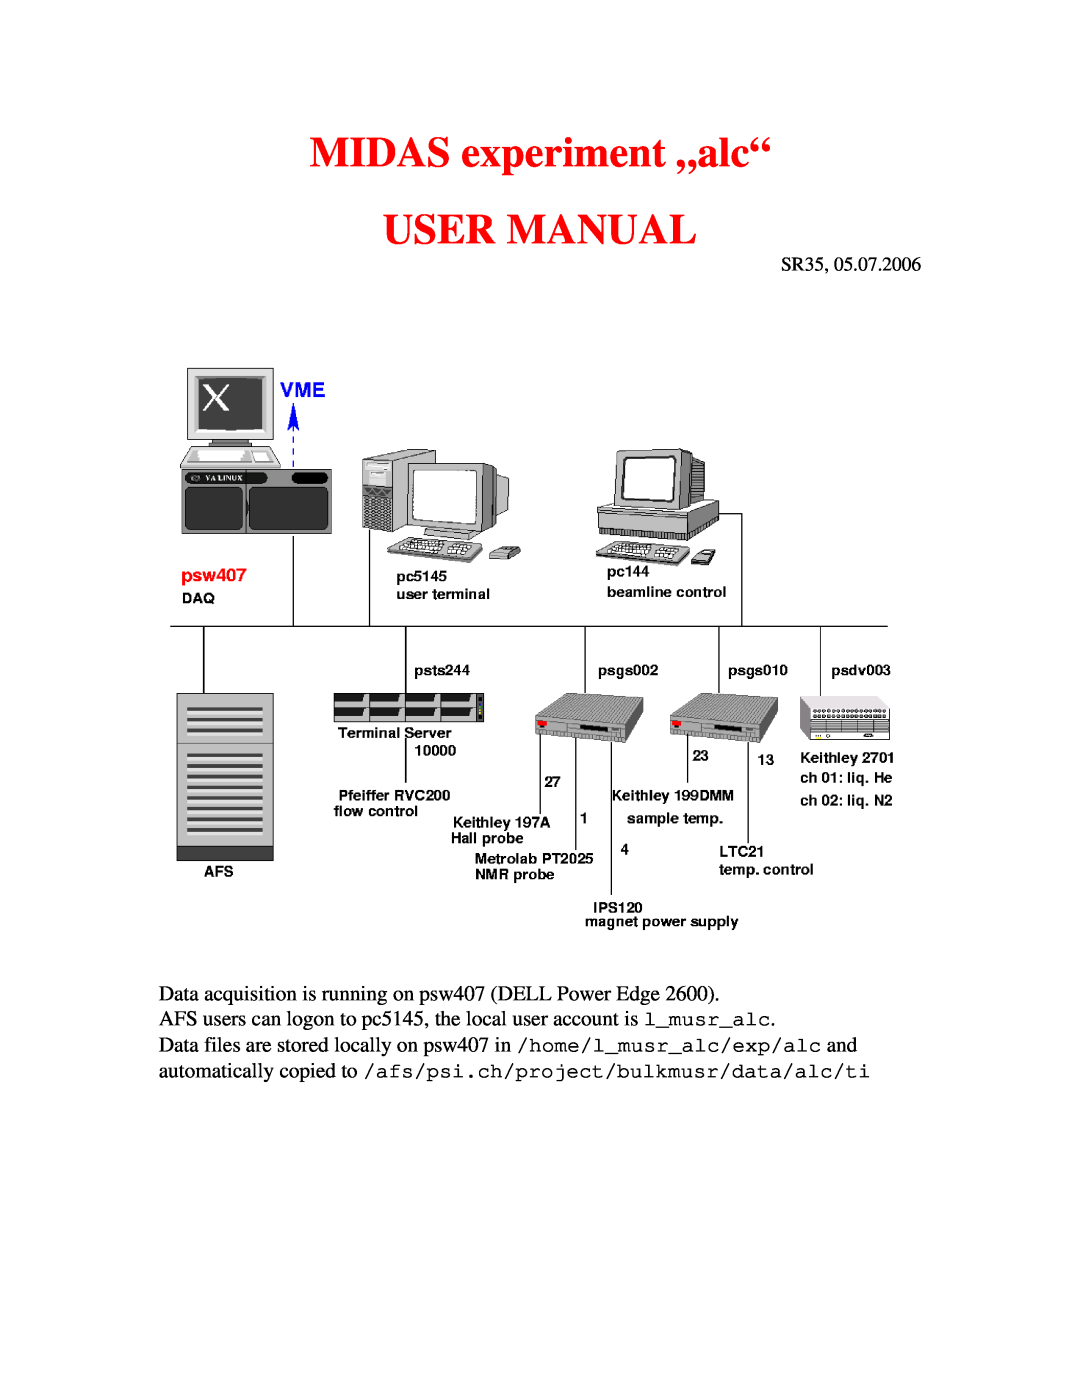 Midas Consoles SR35 user manual Data acquisition is running on psw407 DELL Power Edge, MIDAS experiment „alc“ USER MANUAL 